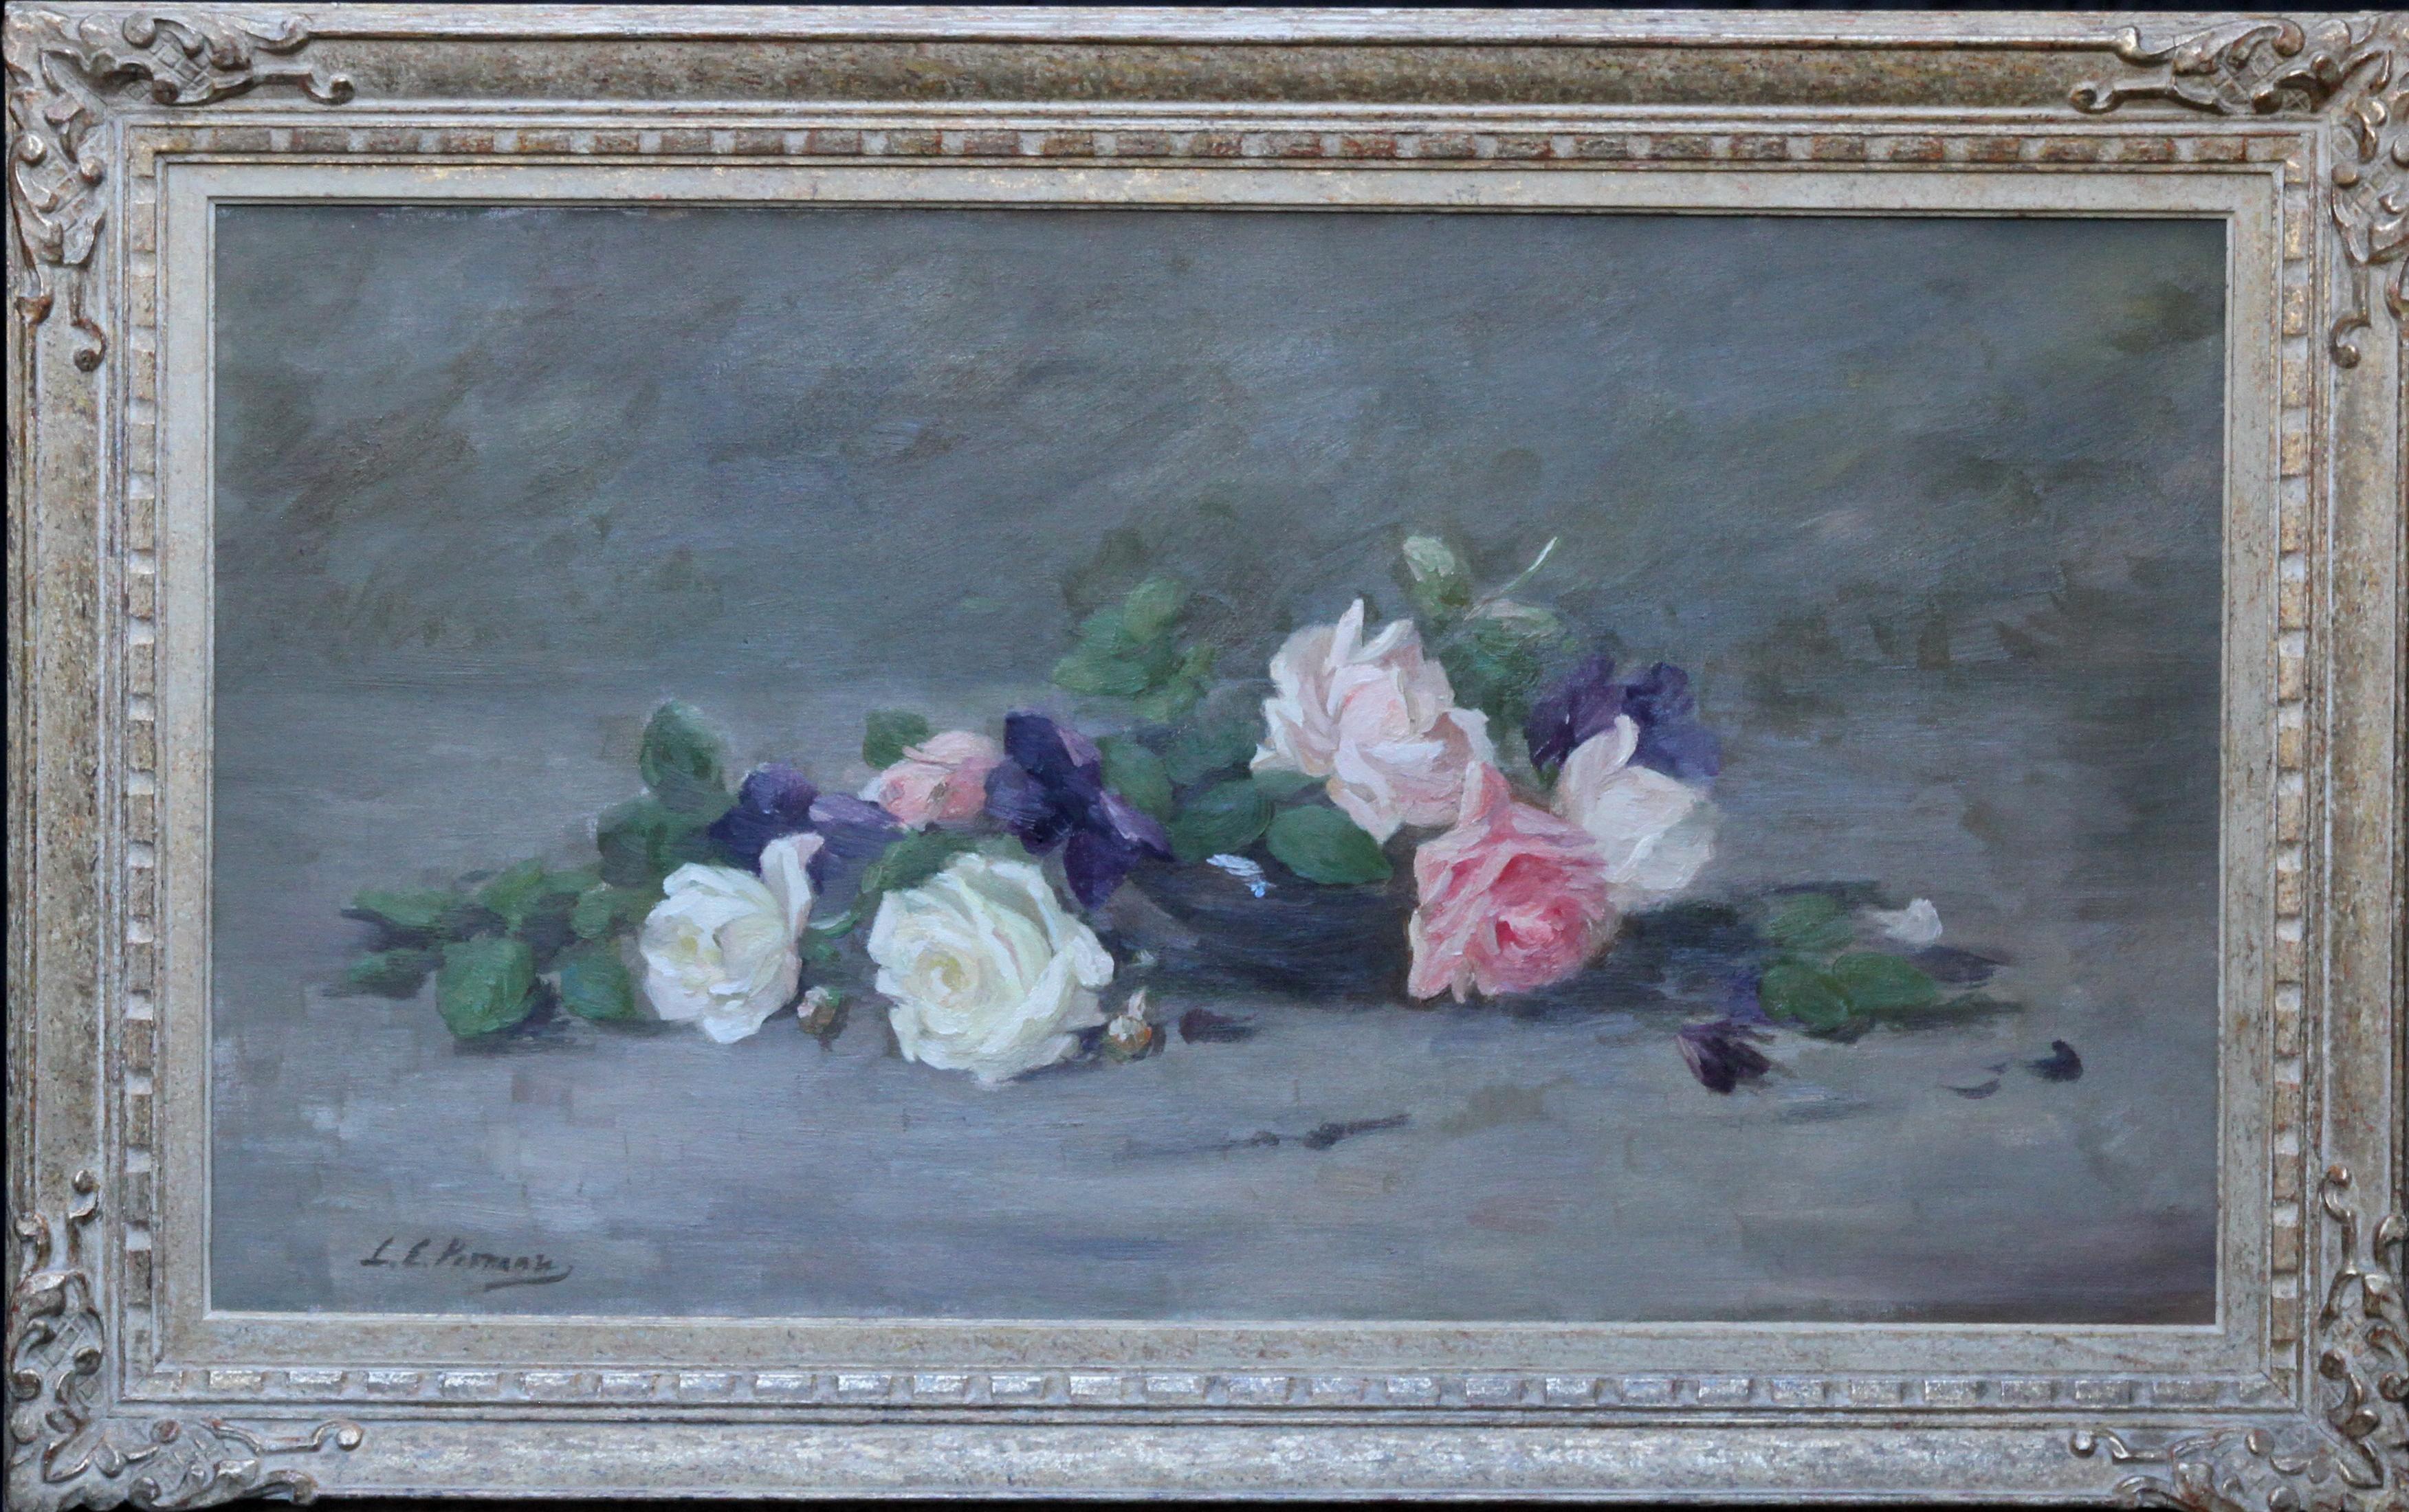 Roses and Violets - Scottish Edwardian art floral oil painting exhib 1908 RSA For Sale 7